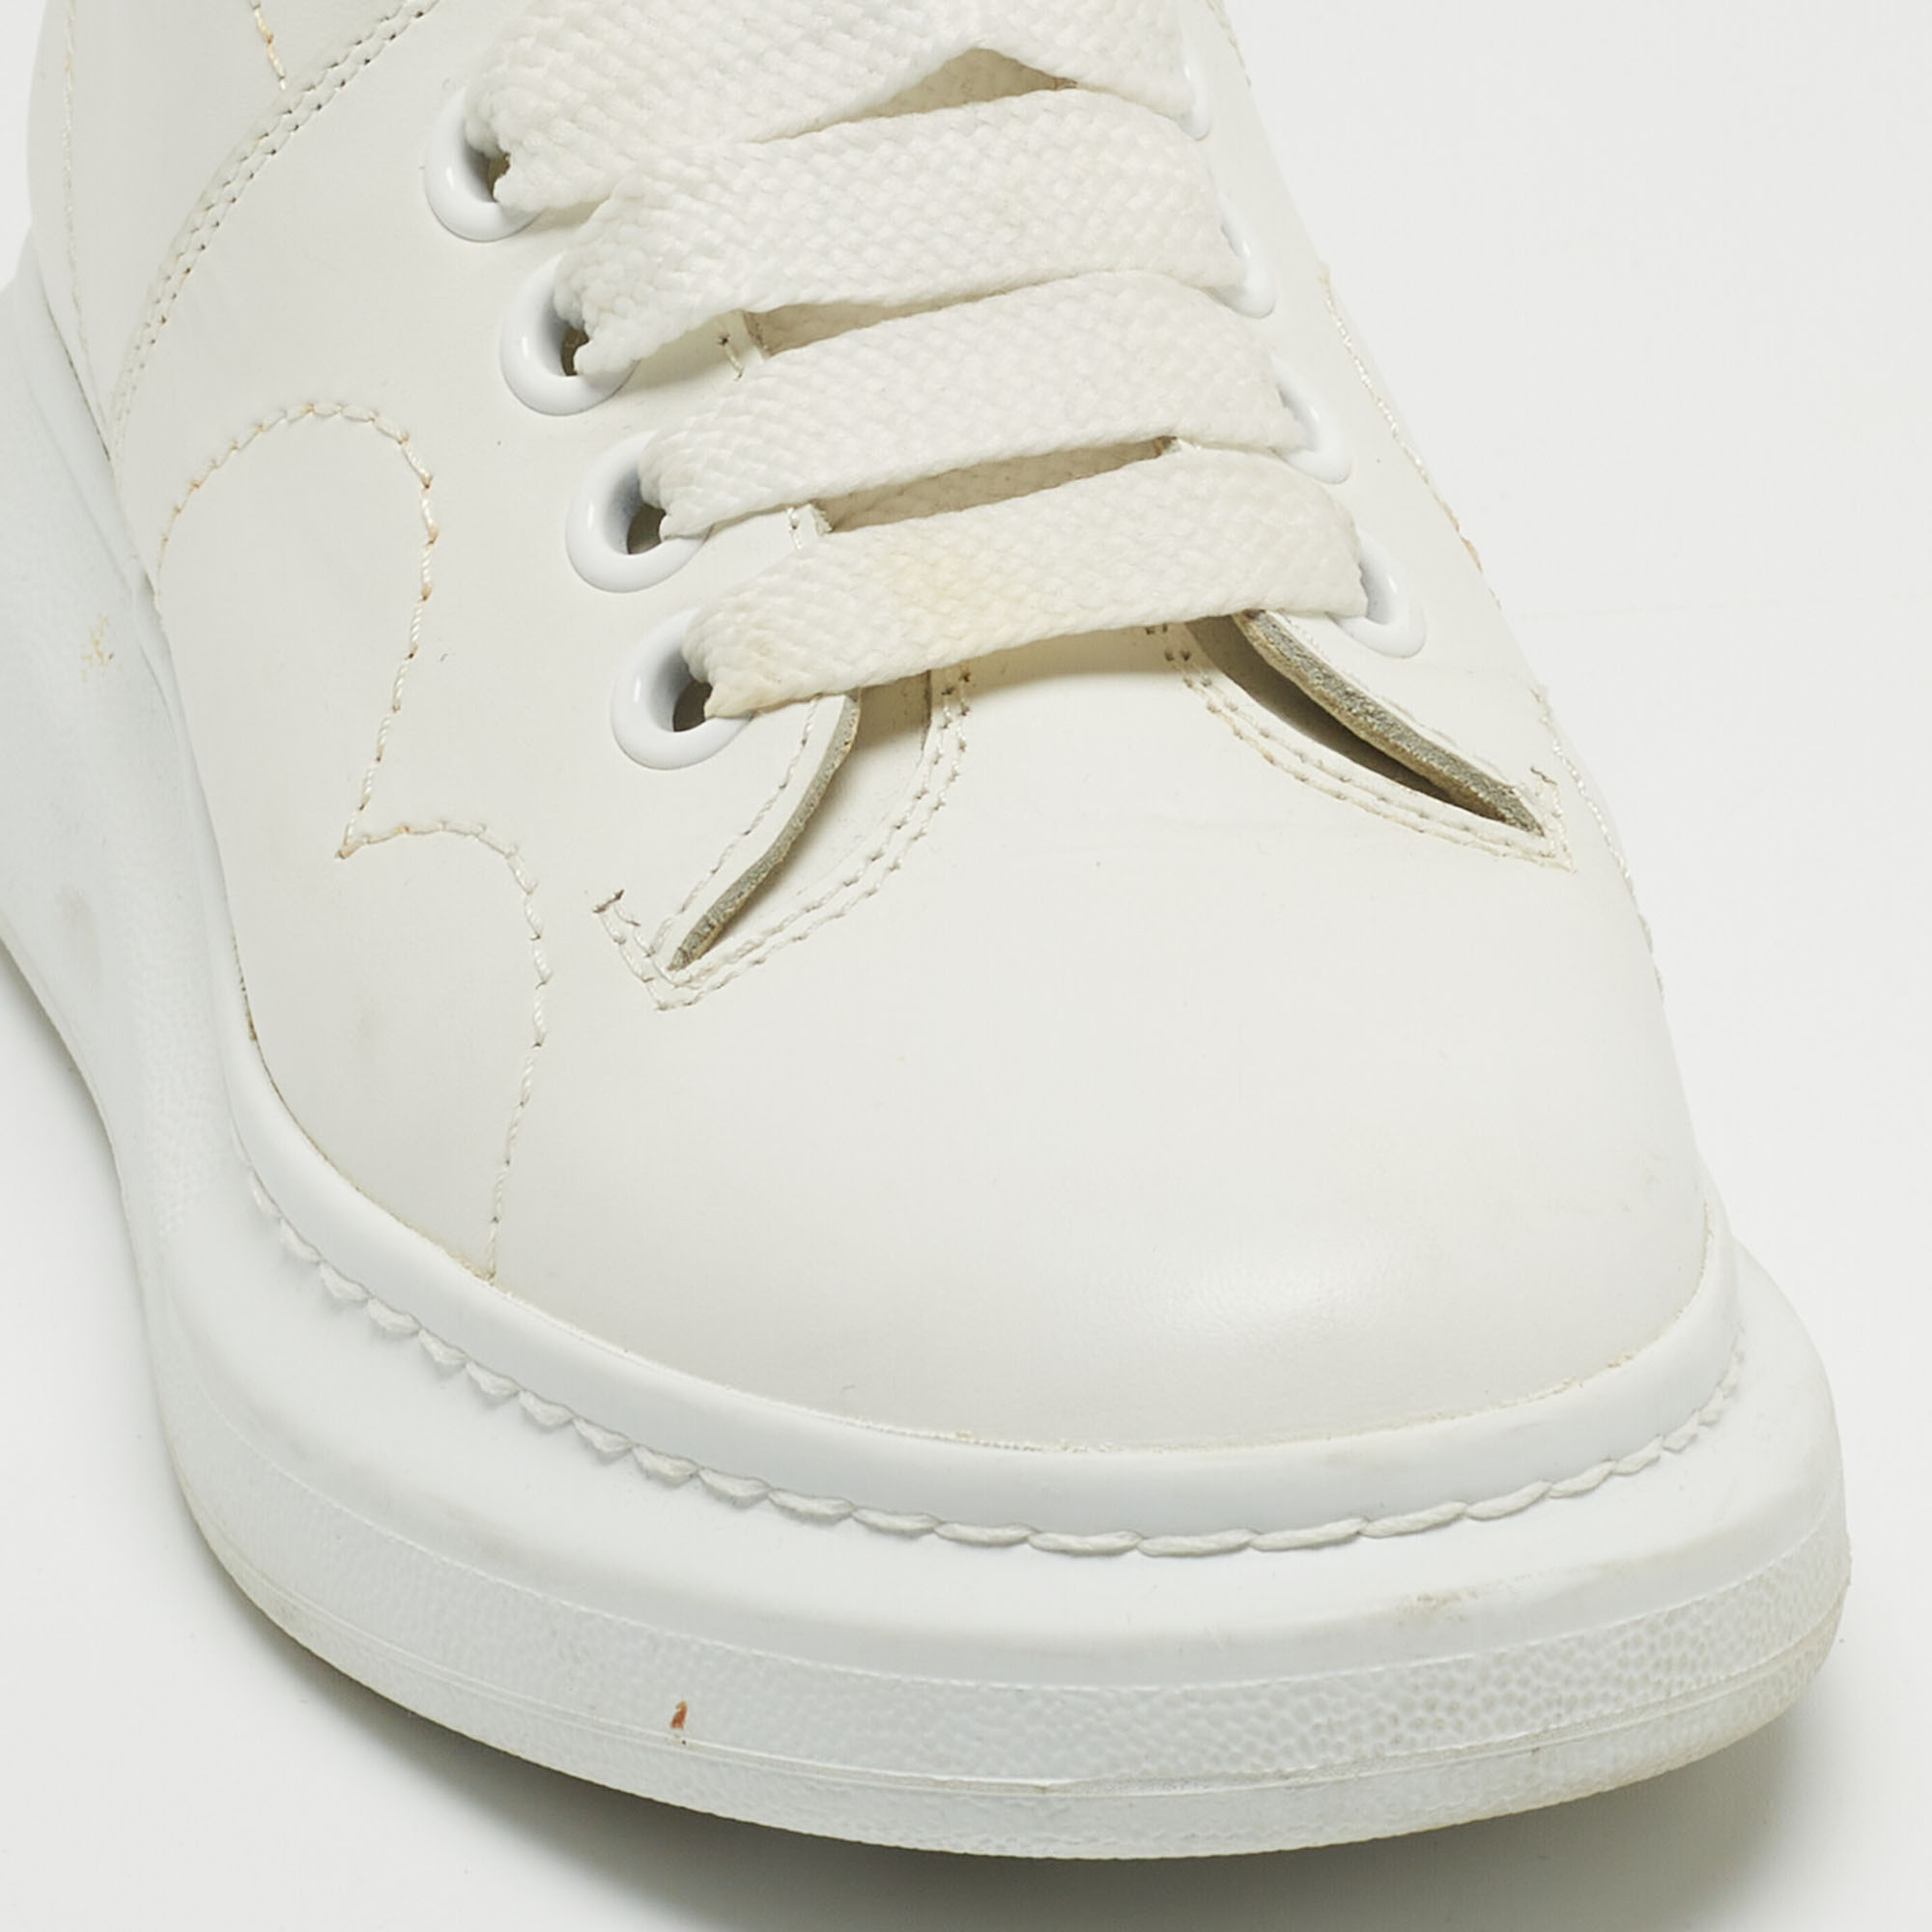 Alexander McQueen White Leather High Top Sneakers Size 36.5